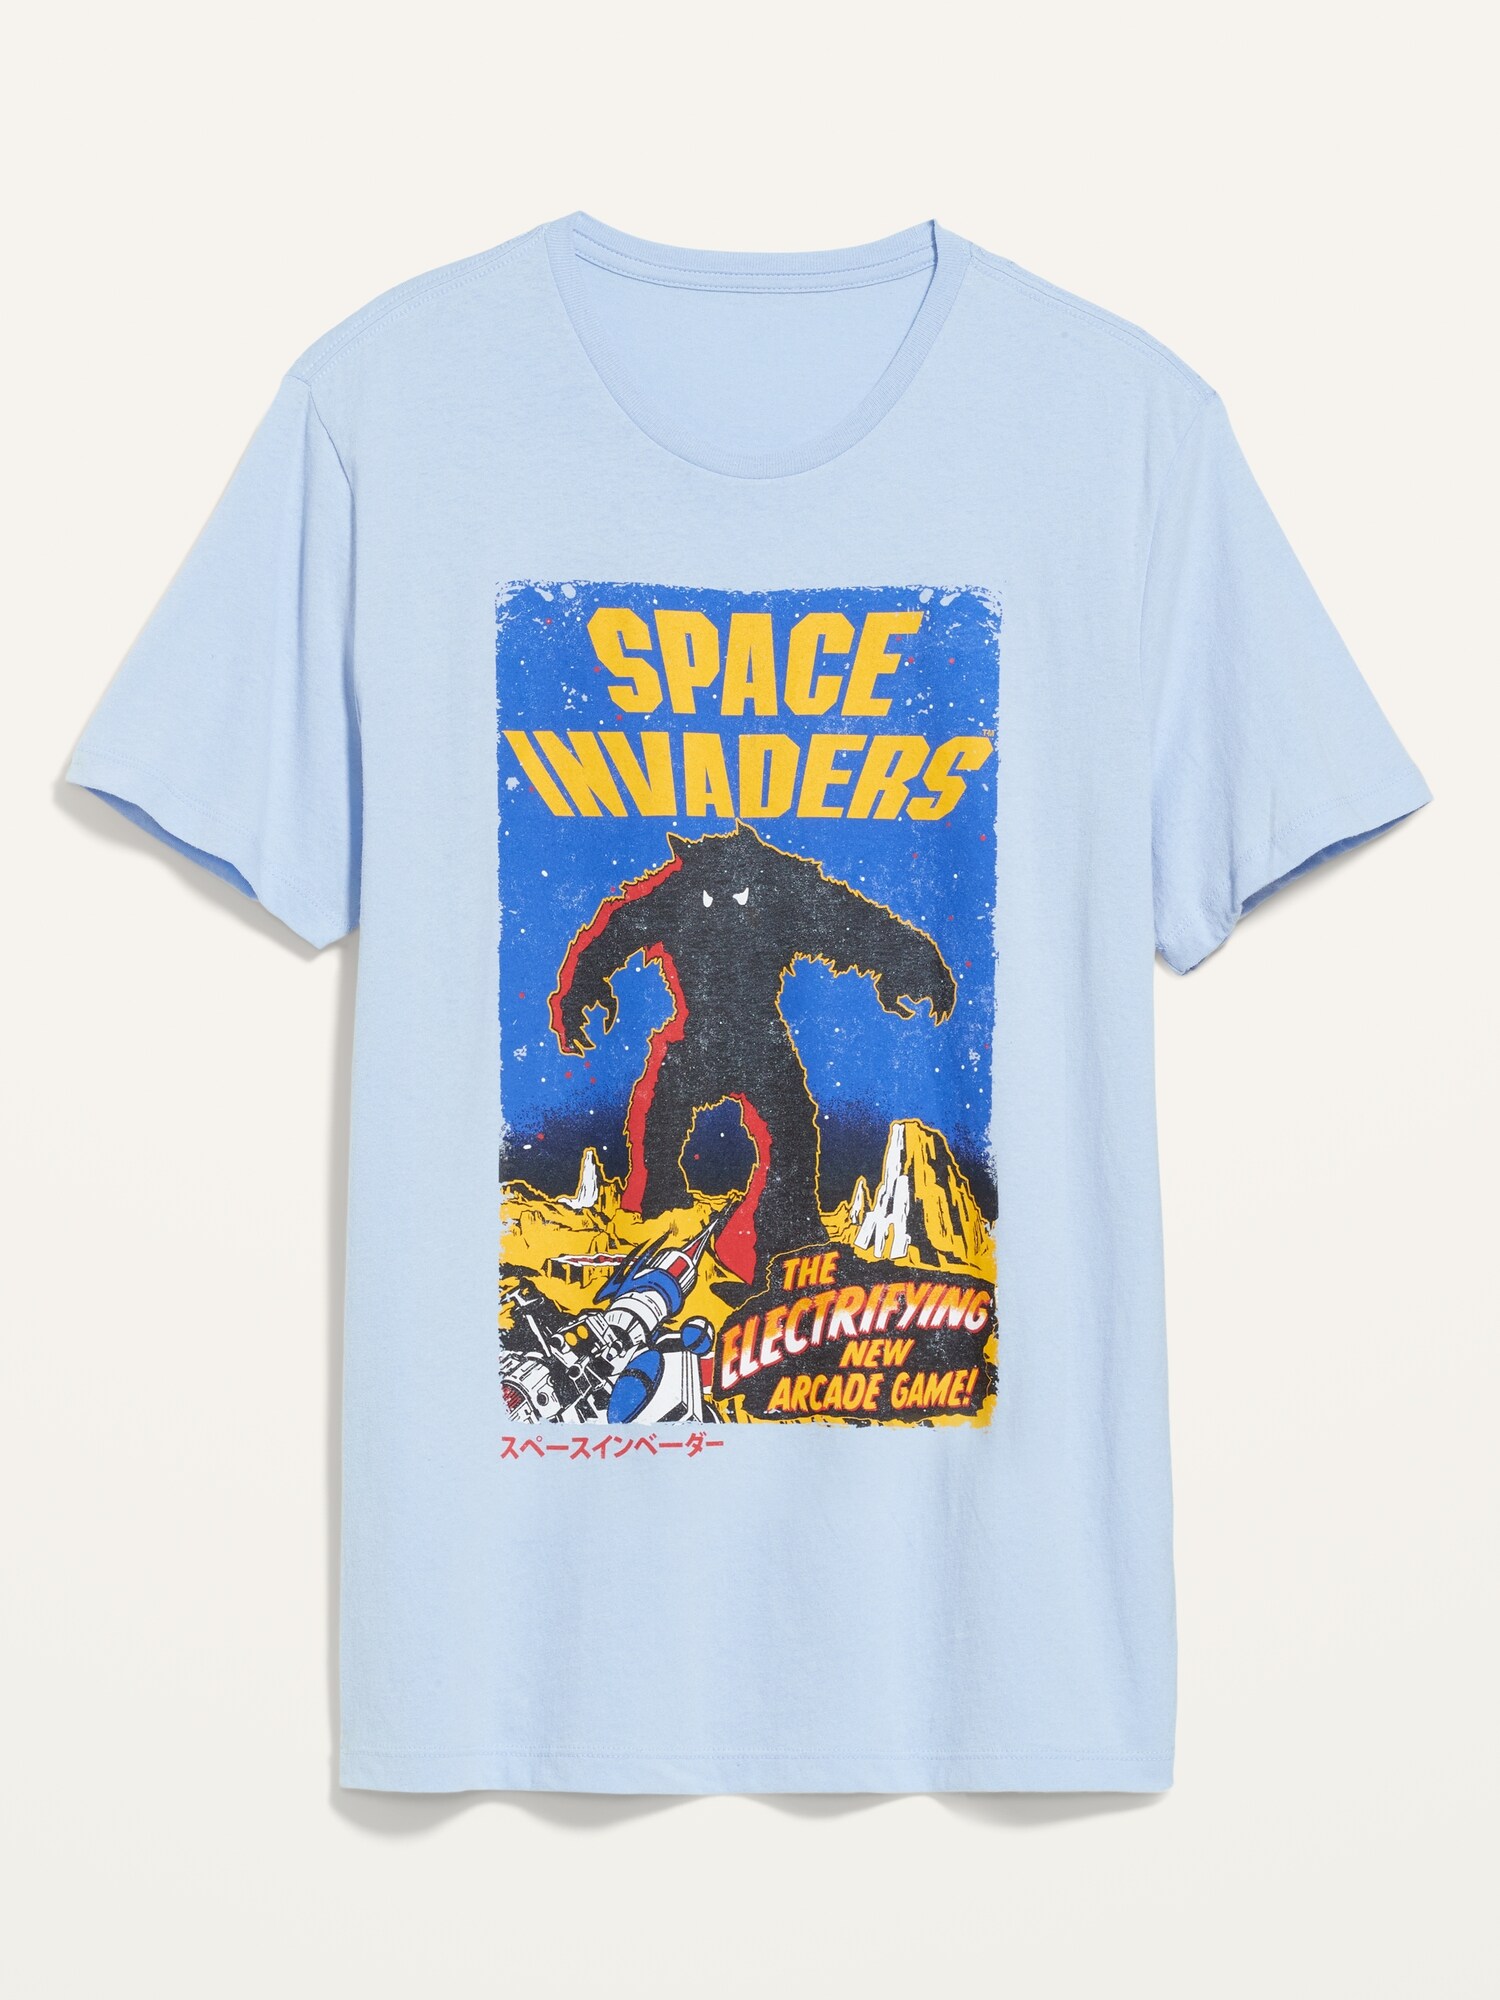 Space Invaders™ Gender-Neutral Graphic T-Shirt for Adults | Old Navy